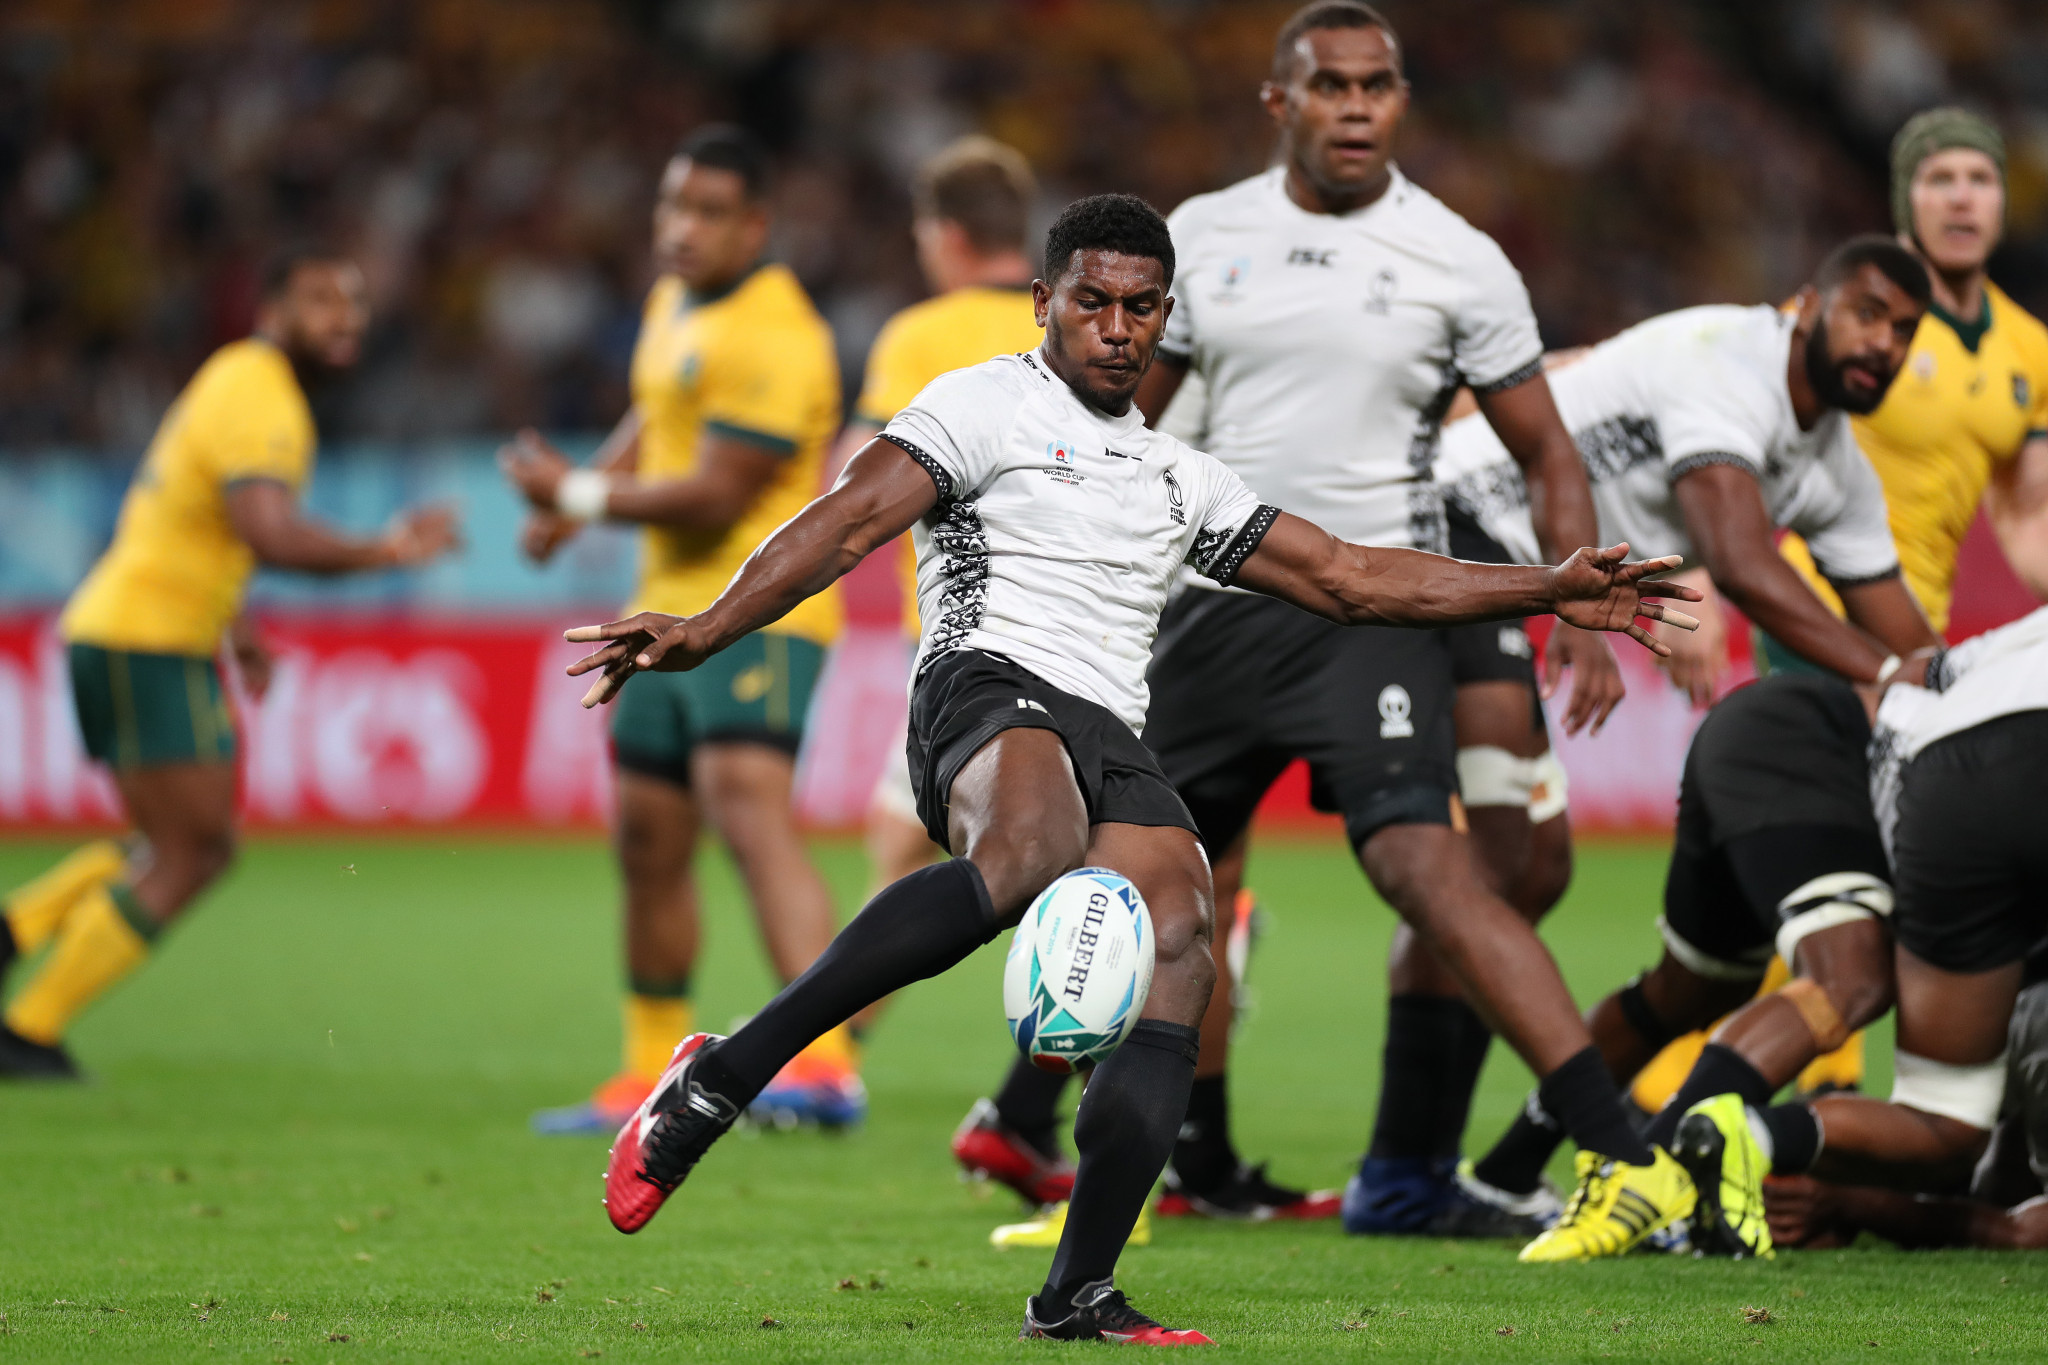 Frank Lomani of Fiji is one of two graduates from the Pacific High Performance Combine to play at the 2019 World Cup ©Getty Images